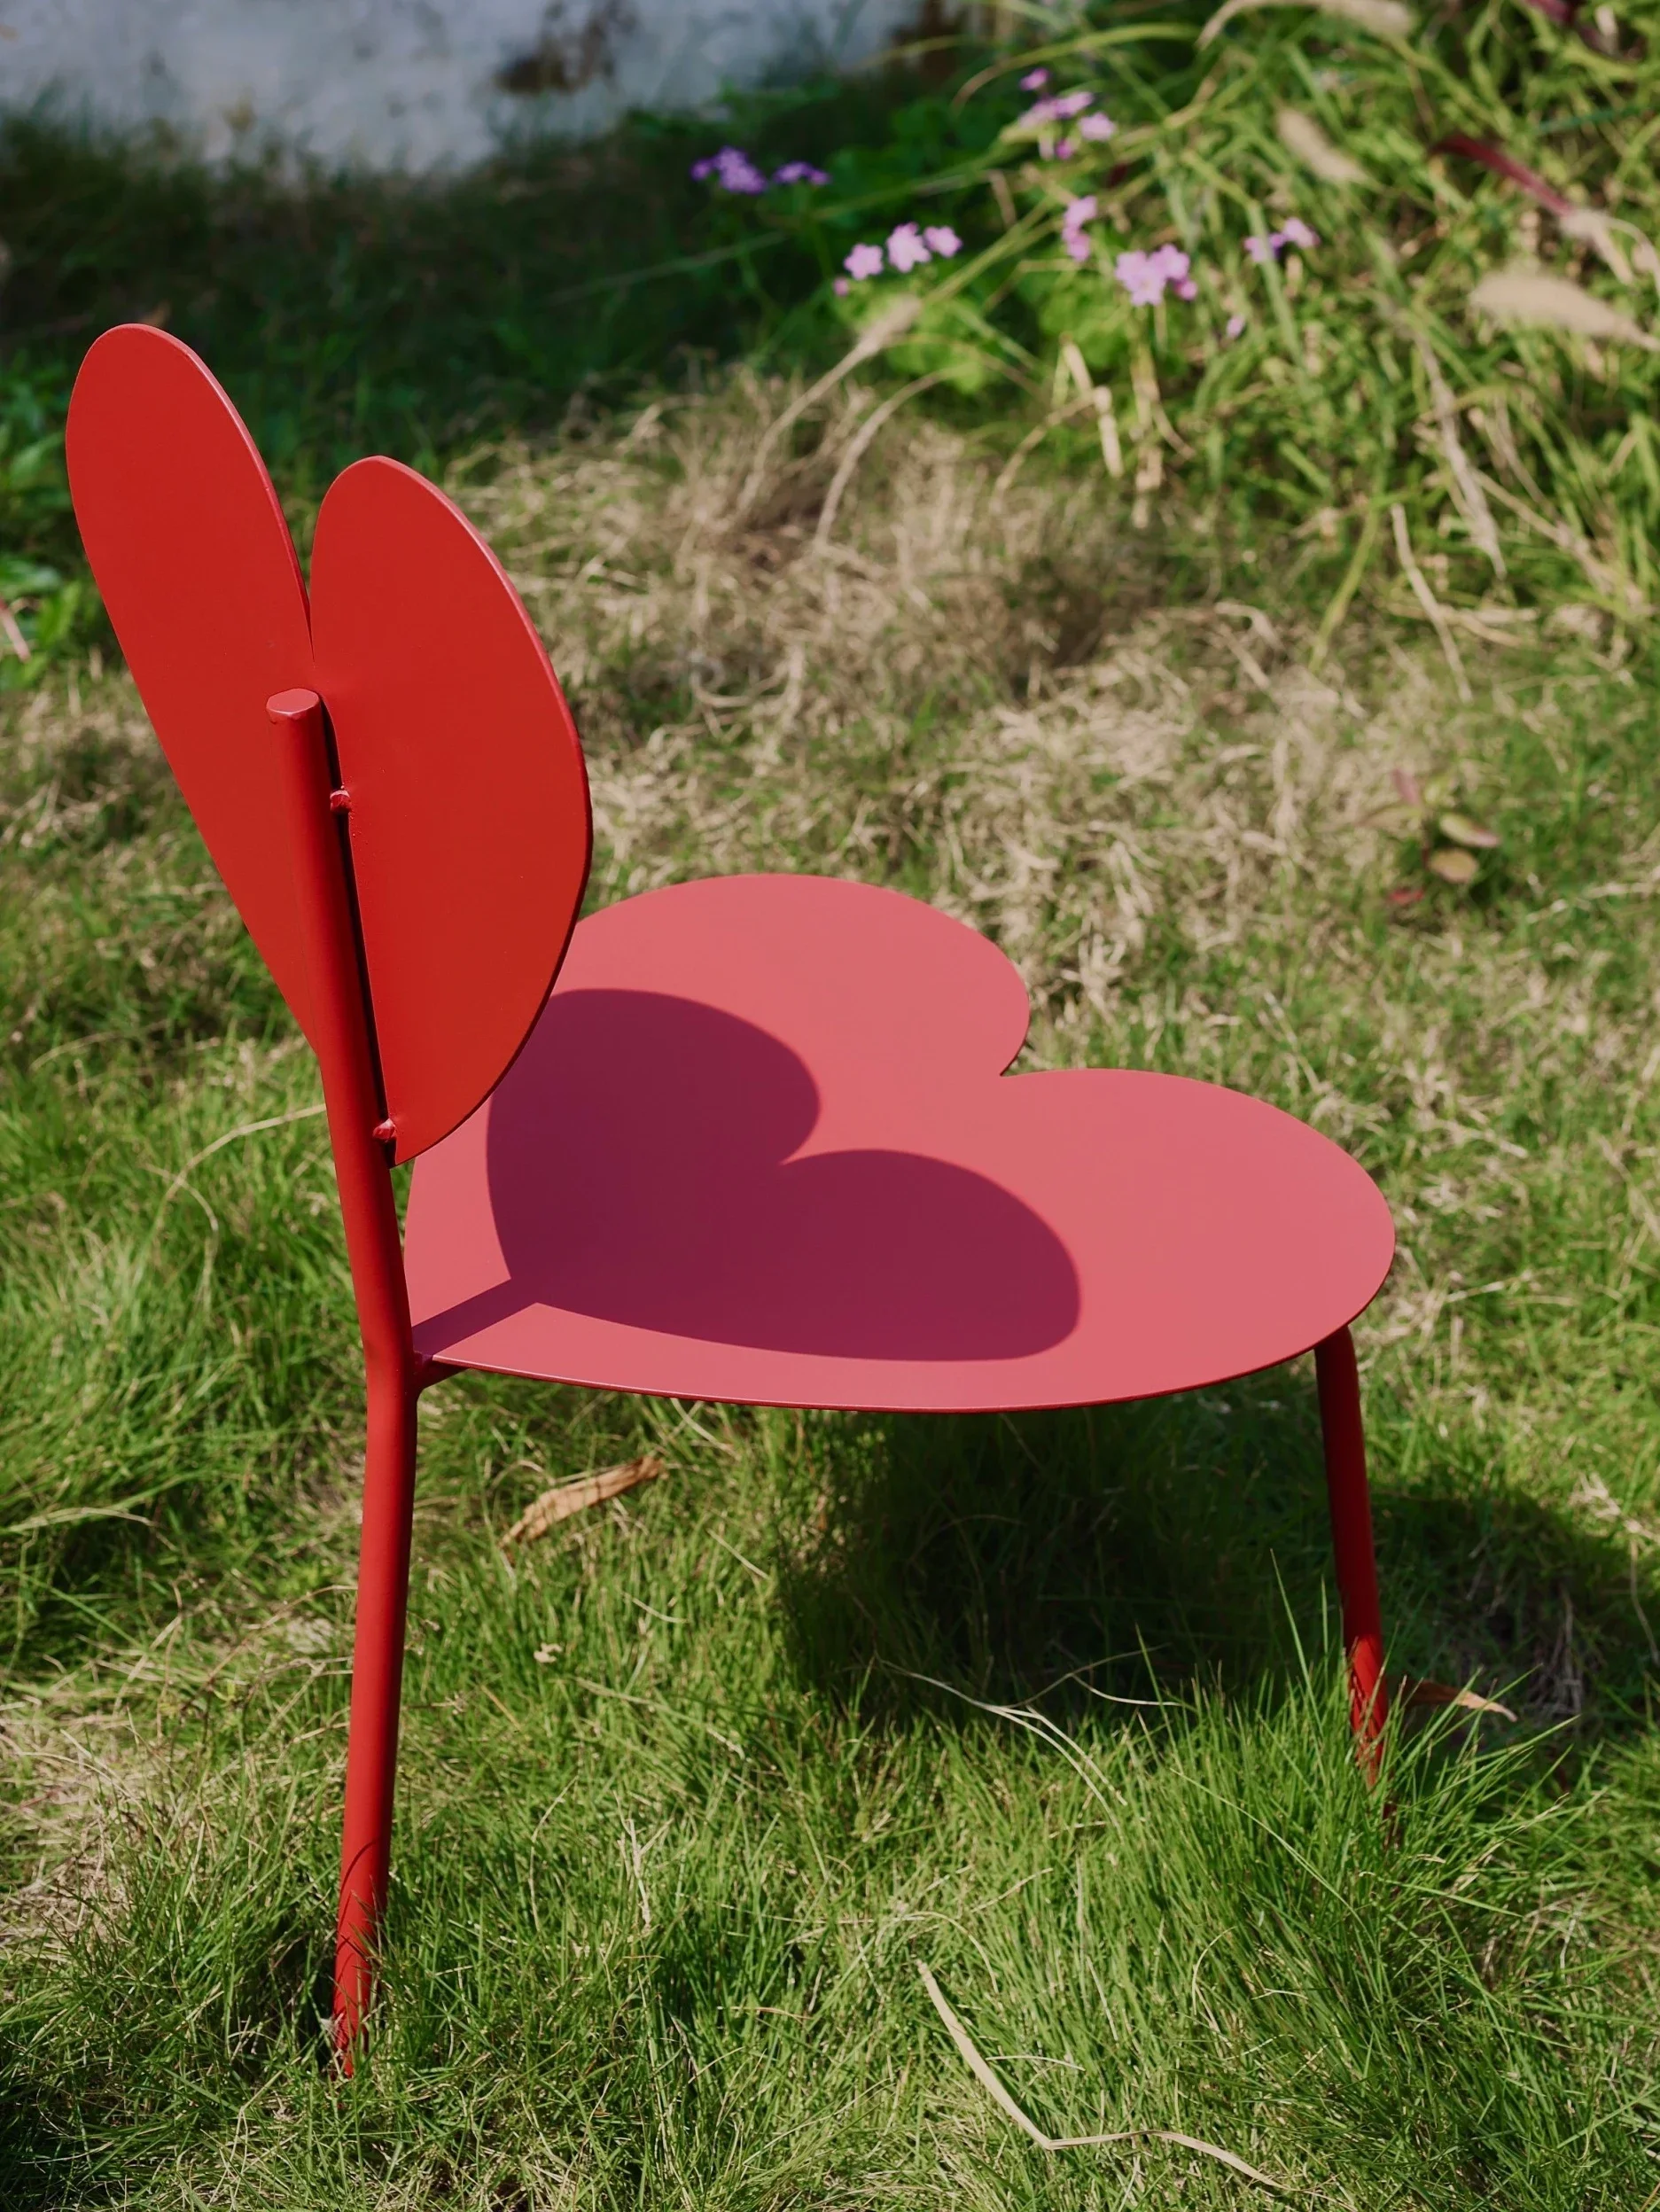 

Love Red Design Chair Extremely Simple Metal Modern Art Love Shape Stools Garden Chairs Outdoor Furniture Balcony Patio Iron Art